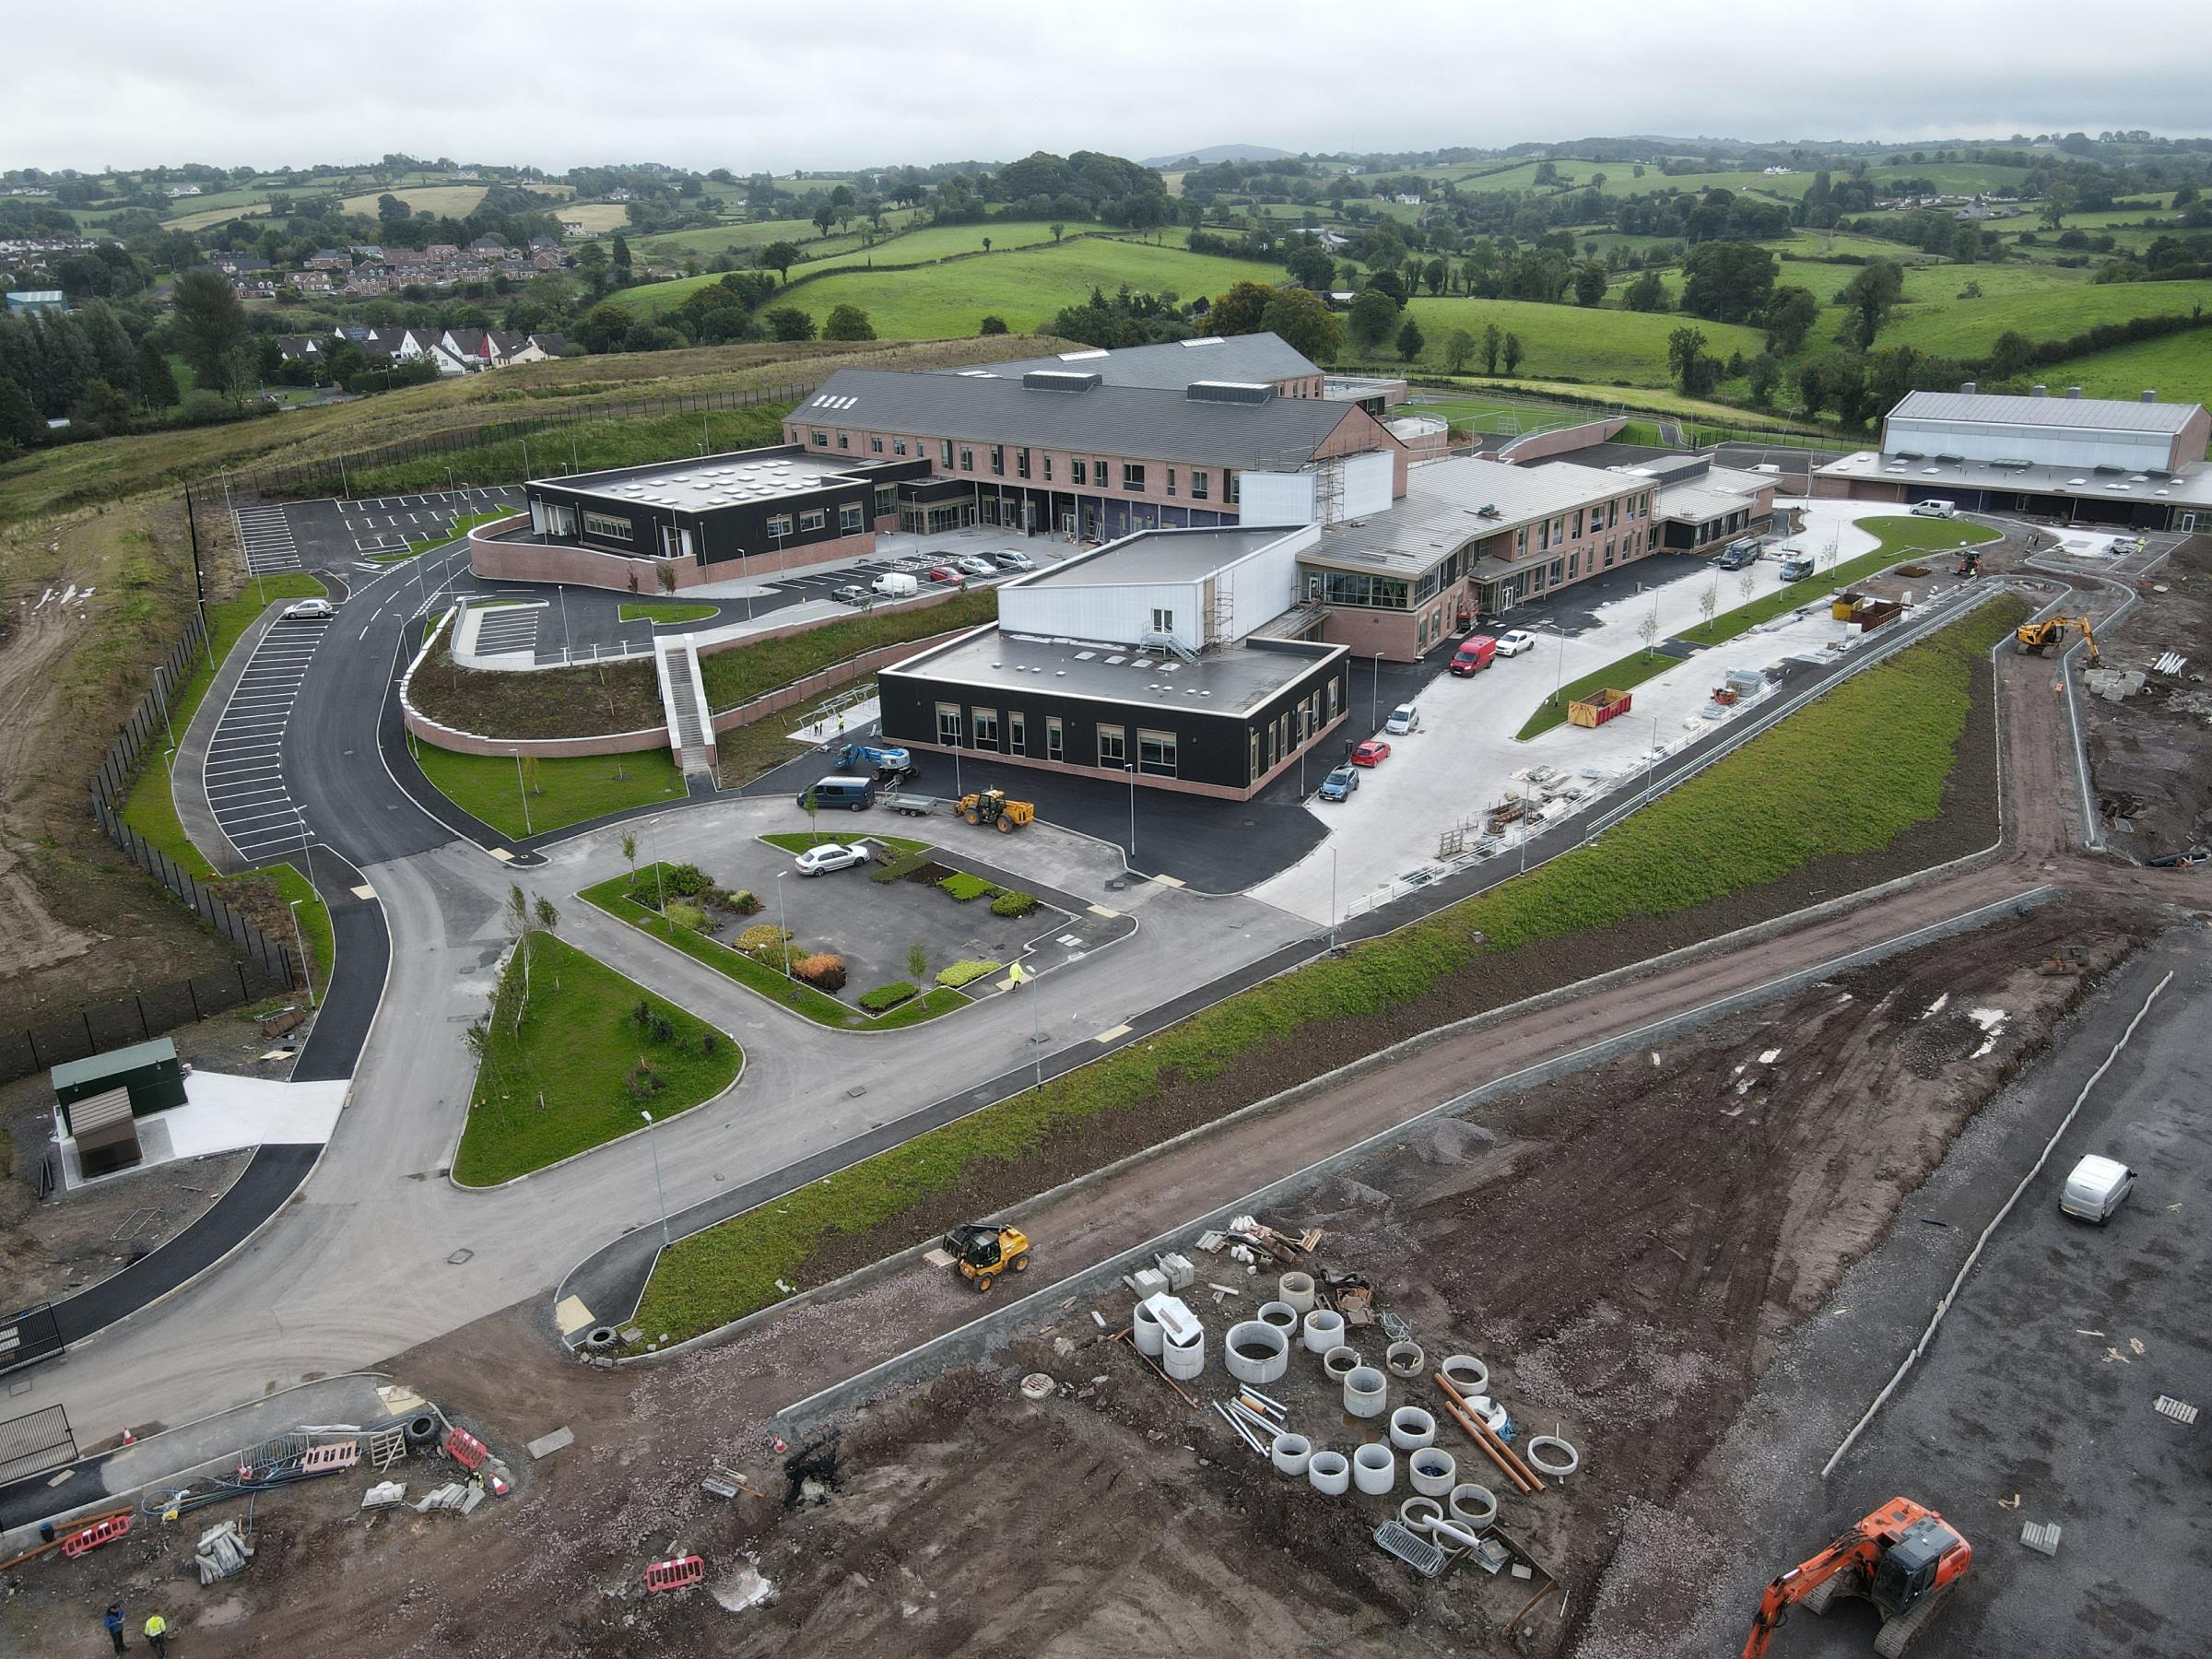 Works continuing at the new Devenish College building and site.